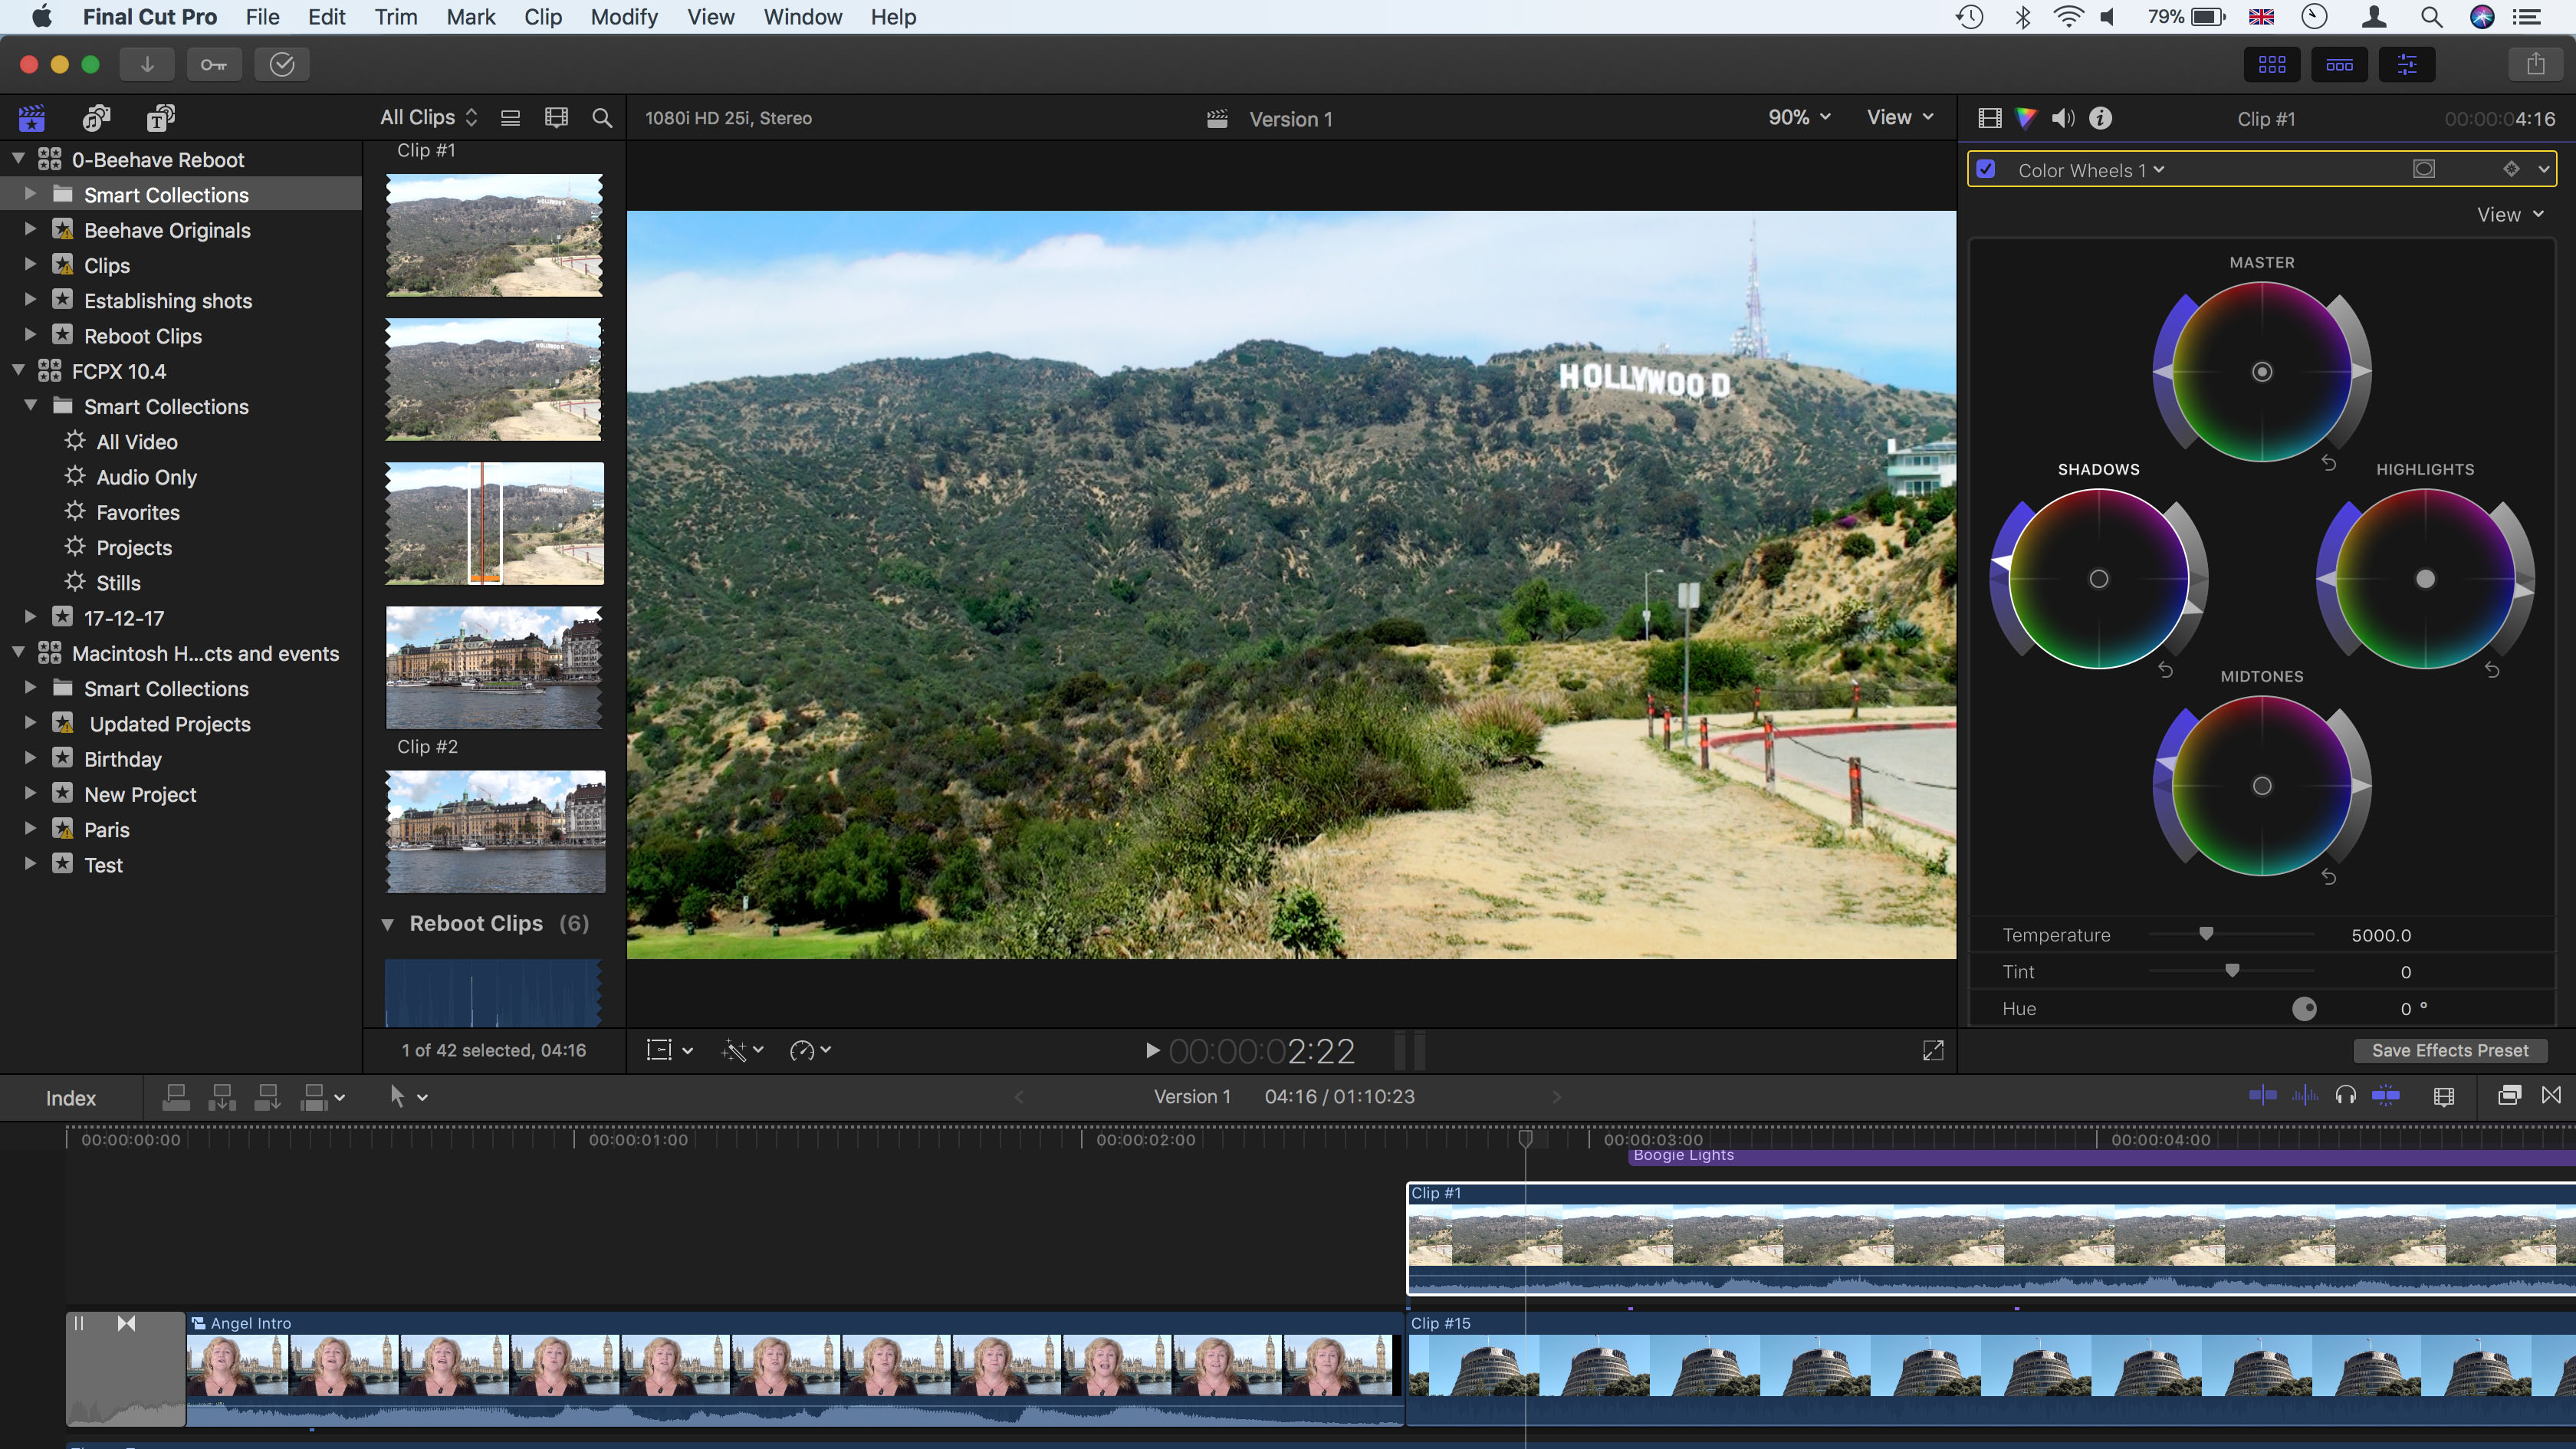 how to install neat video mac for final cut pro